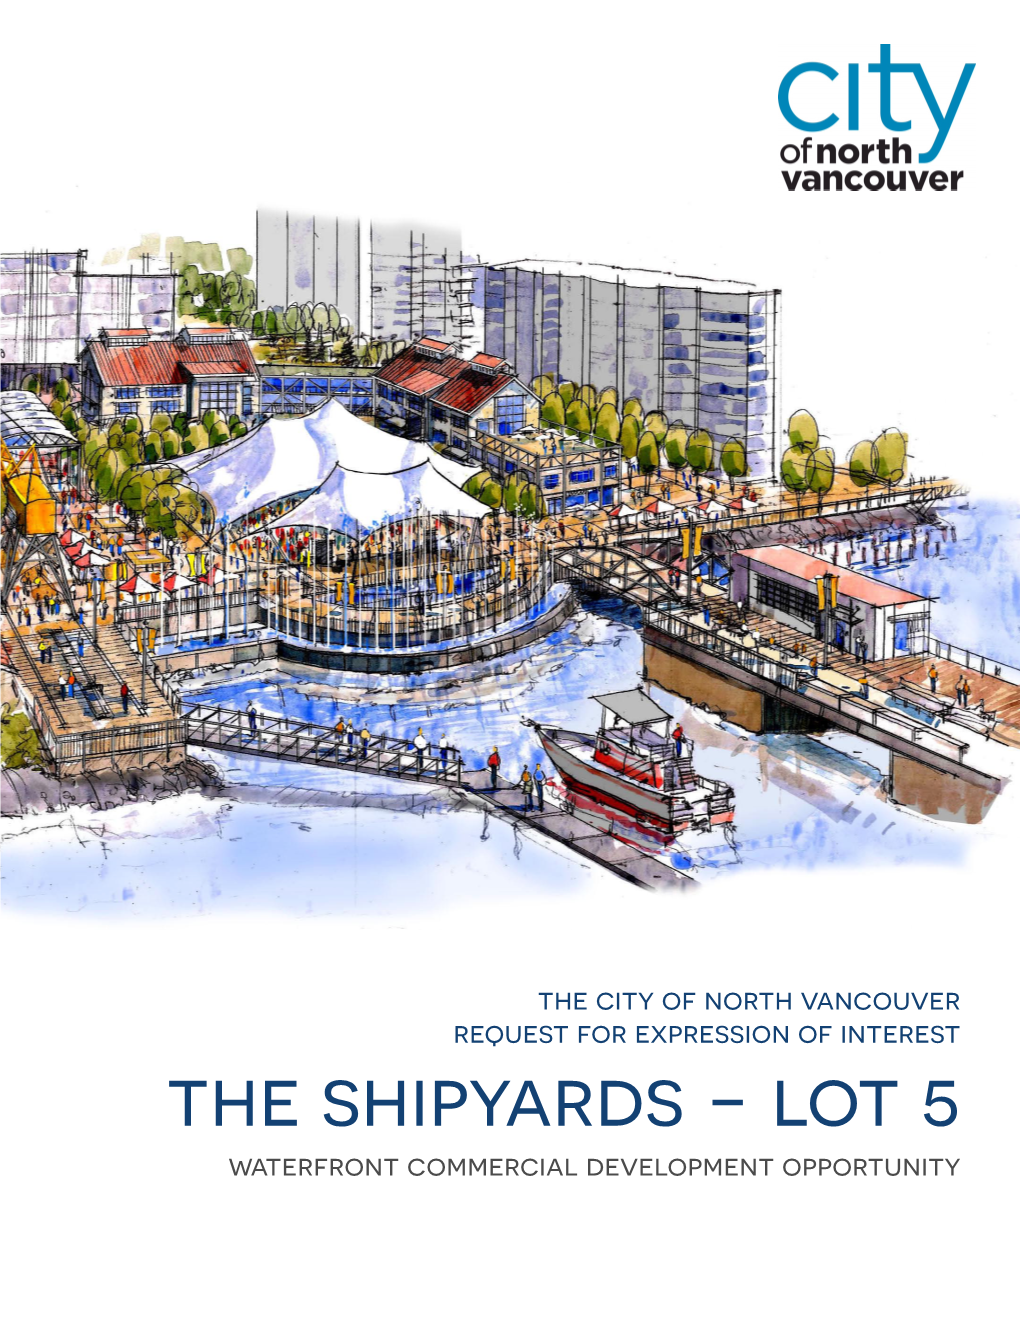 The Shipyards - Lot 5 Waterfront Commercial Development Opportunity Table of Contents